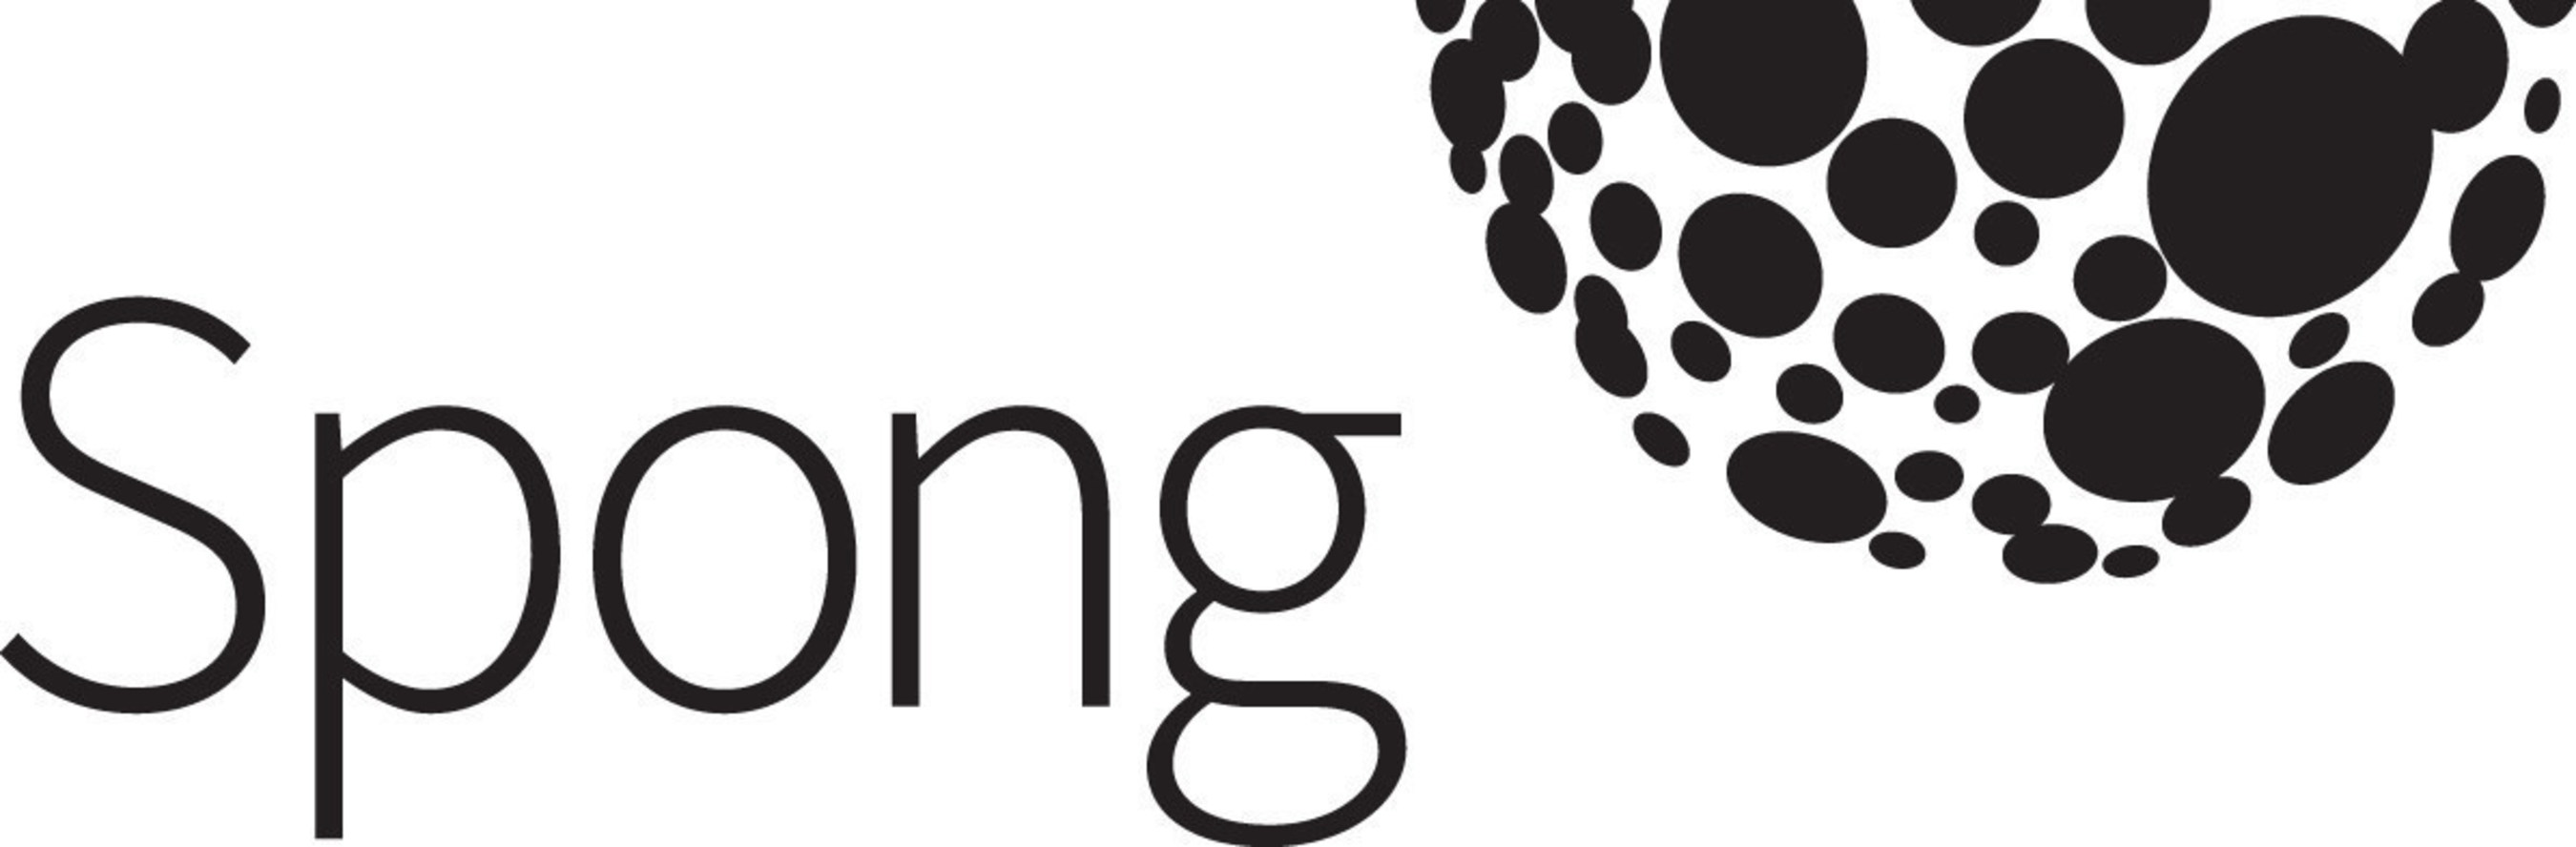 Spong is one of the most award-winning public relations agencies and is a division of Carmichael Lynch Inc., which is owned by the Interpublic Group of Companies Inc.